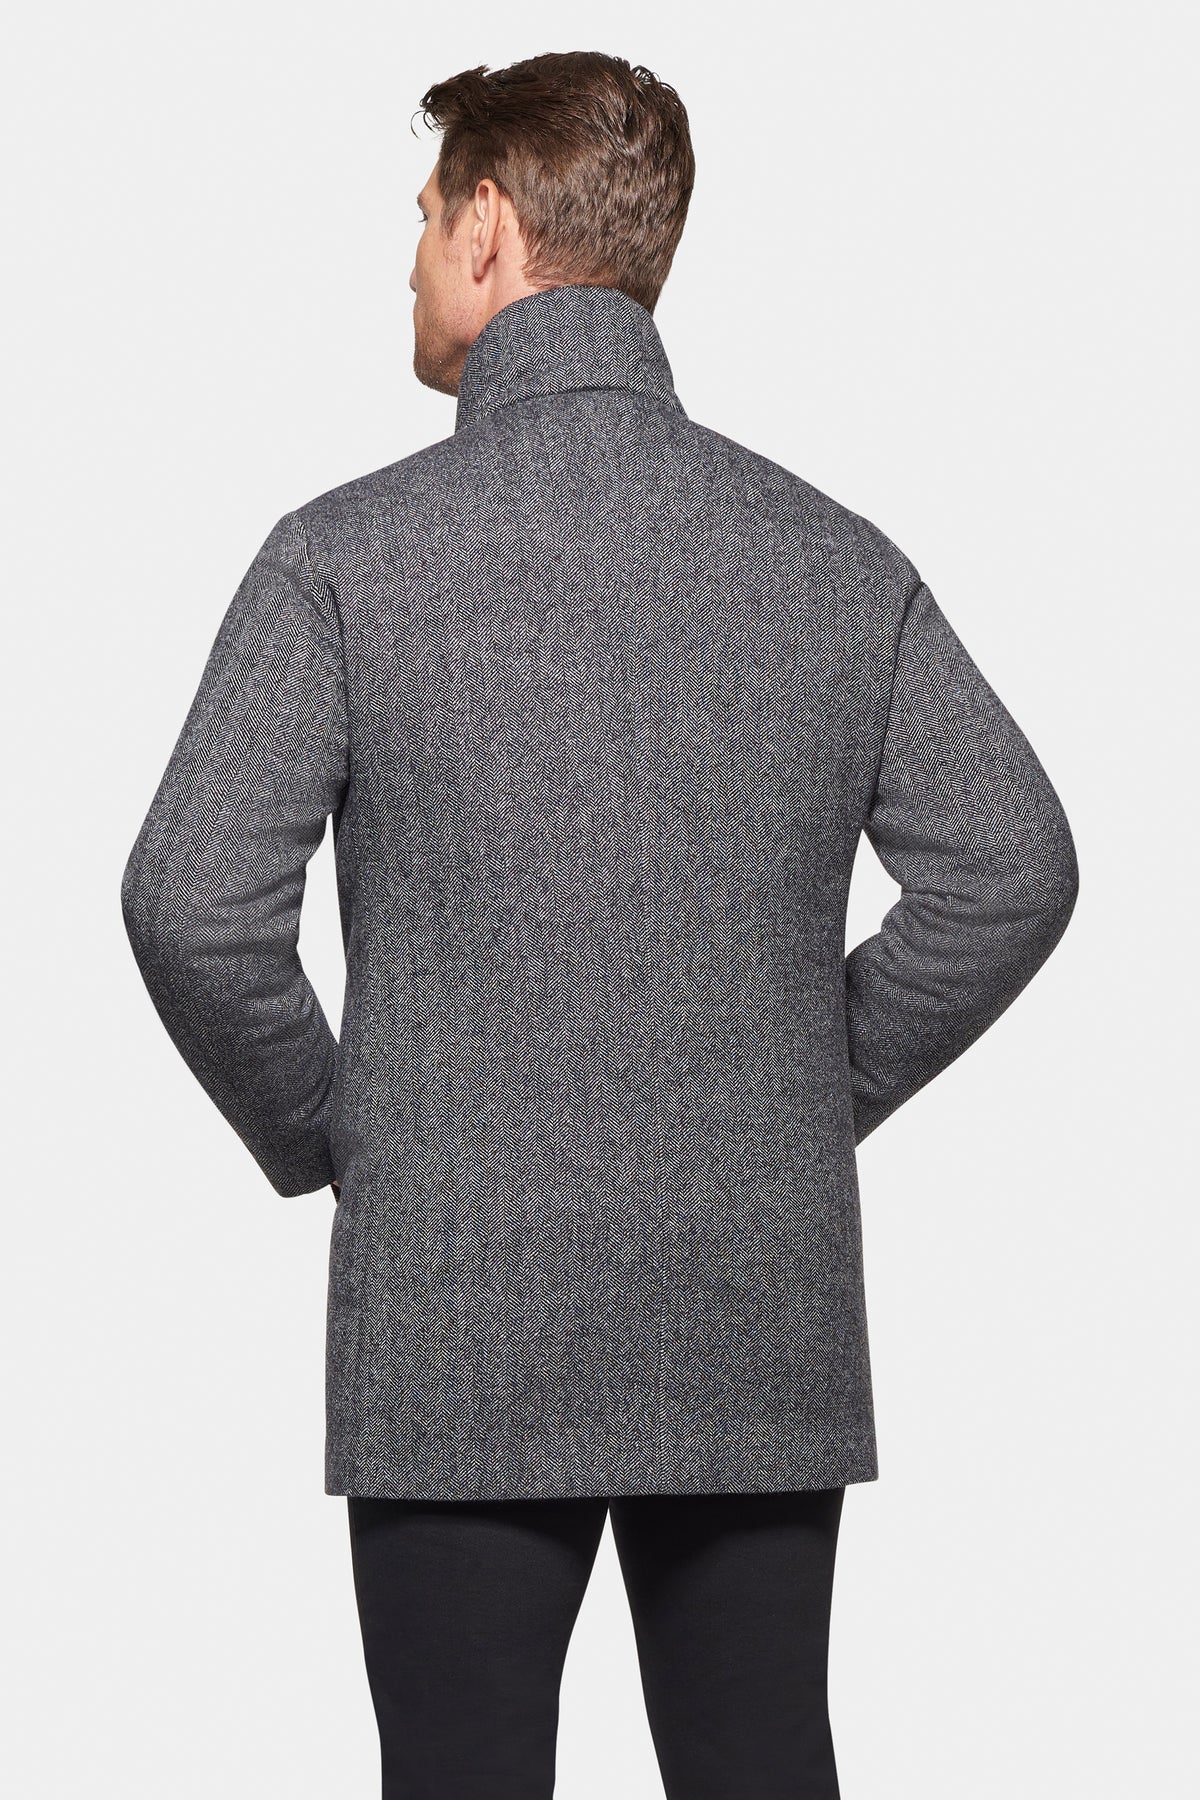 Down-Lined Waterproof Cashmere Wool Carcoat - Warmest Stylish Option for the Winter